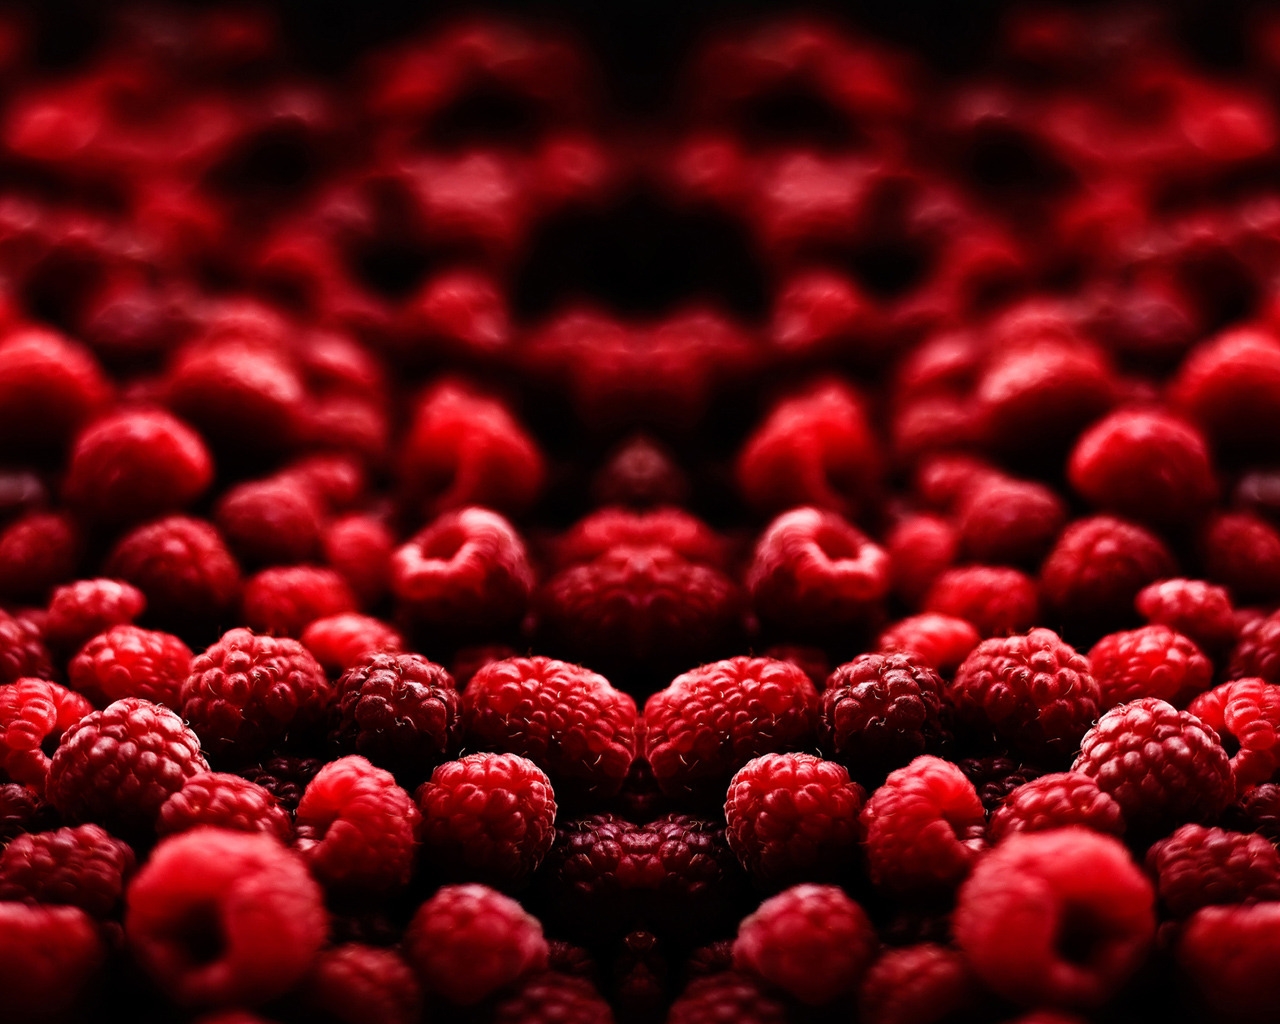 Blood Fruit for 1280 x 1024 resolution